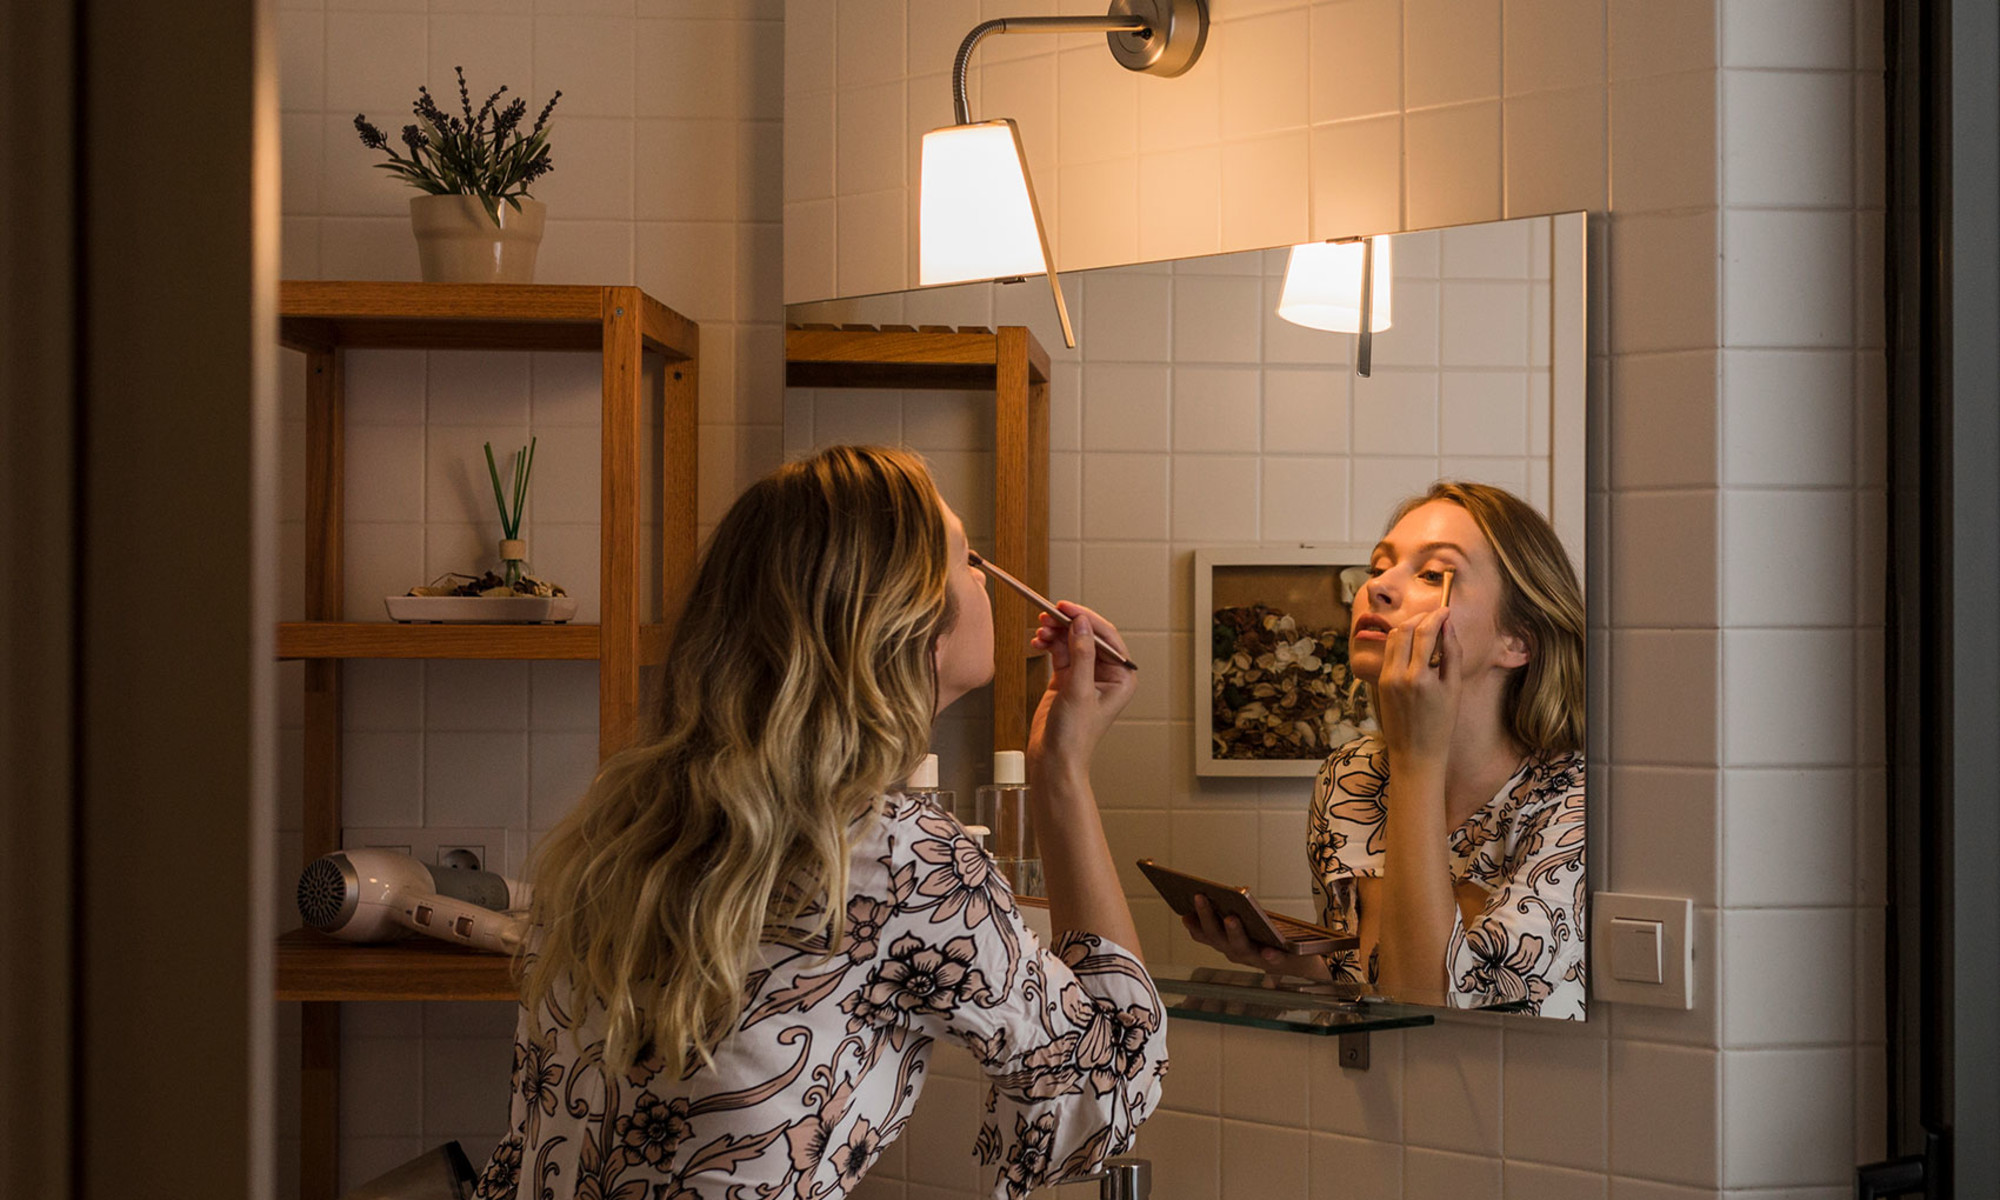 3 Unhealthy Make-up Habits To Ditch For Good Hygiene